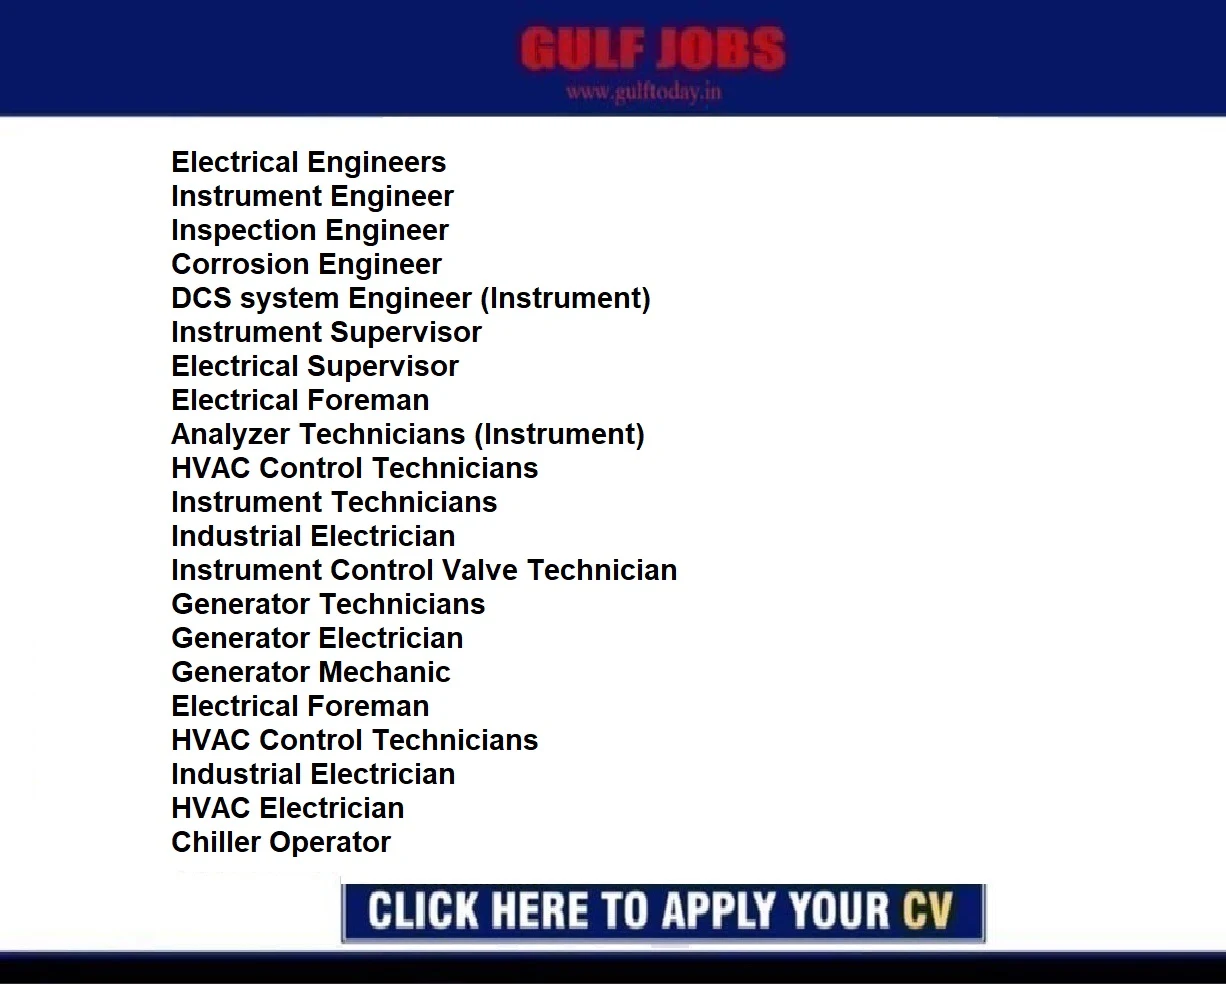 Middle East Jobs-Electrical Engineers-Instrument Engineer-Inspection Engineer-Corrosion Engineer- DCS system Engineer -Instrument Supervisor- Electrical Supervisor-Electrical Foreman-Analyzer Technicians-HVAC Control Technicians-Instrument Technicians-Industrial Electrician-Instrument Control Valve Technician-Generator Technicians-HVAC Control Technicians-HVAC Electrician-Chiller Operator-BMS Operators